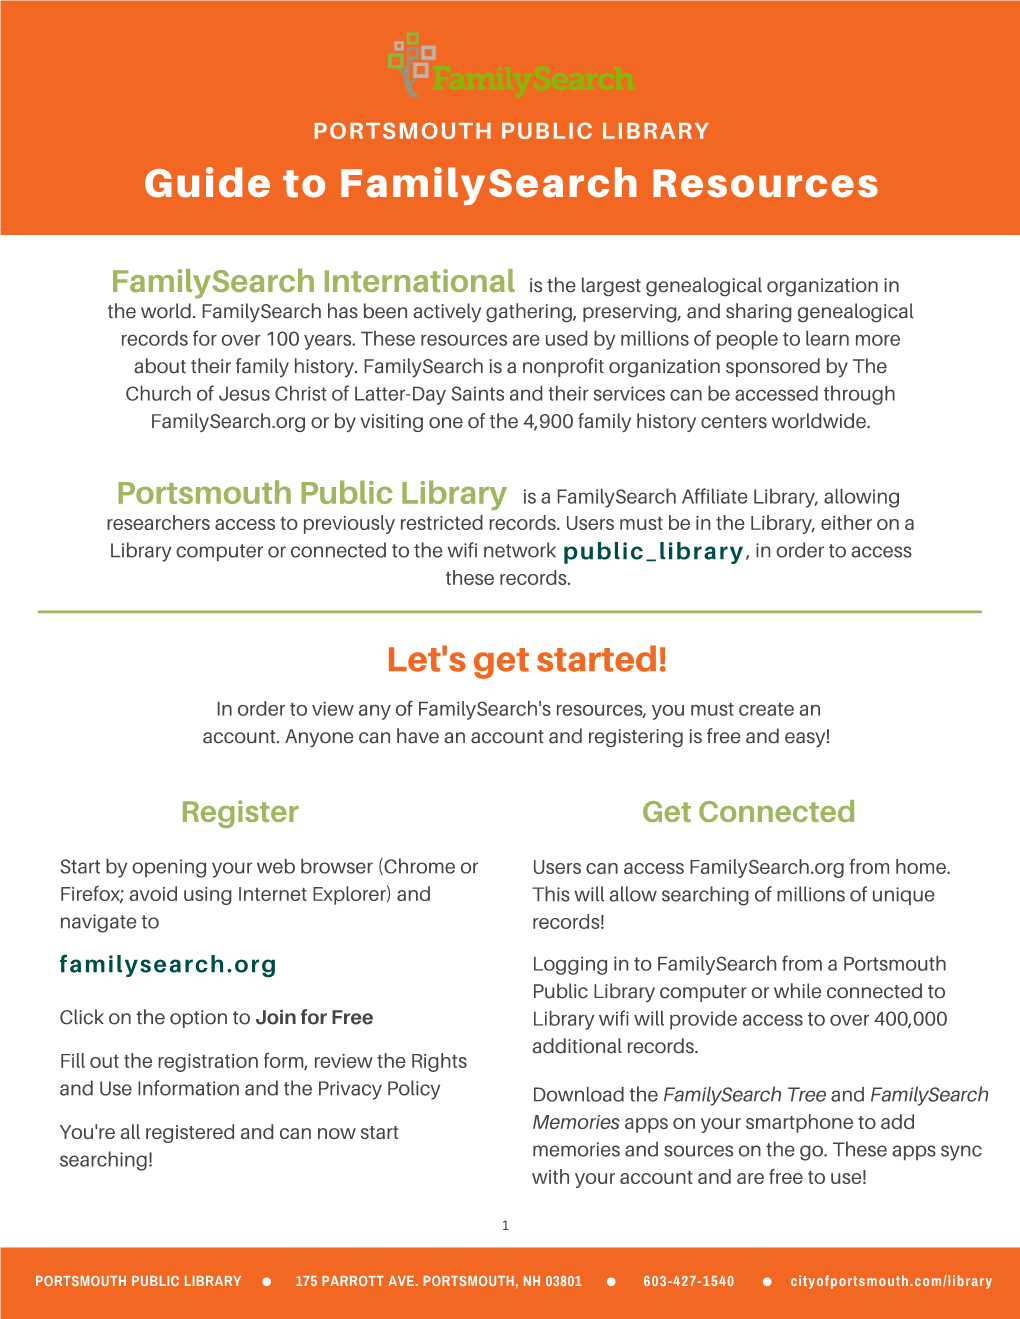 Guide to Familysearch Resources